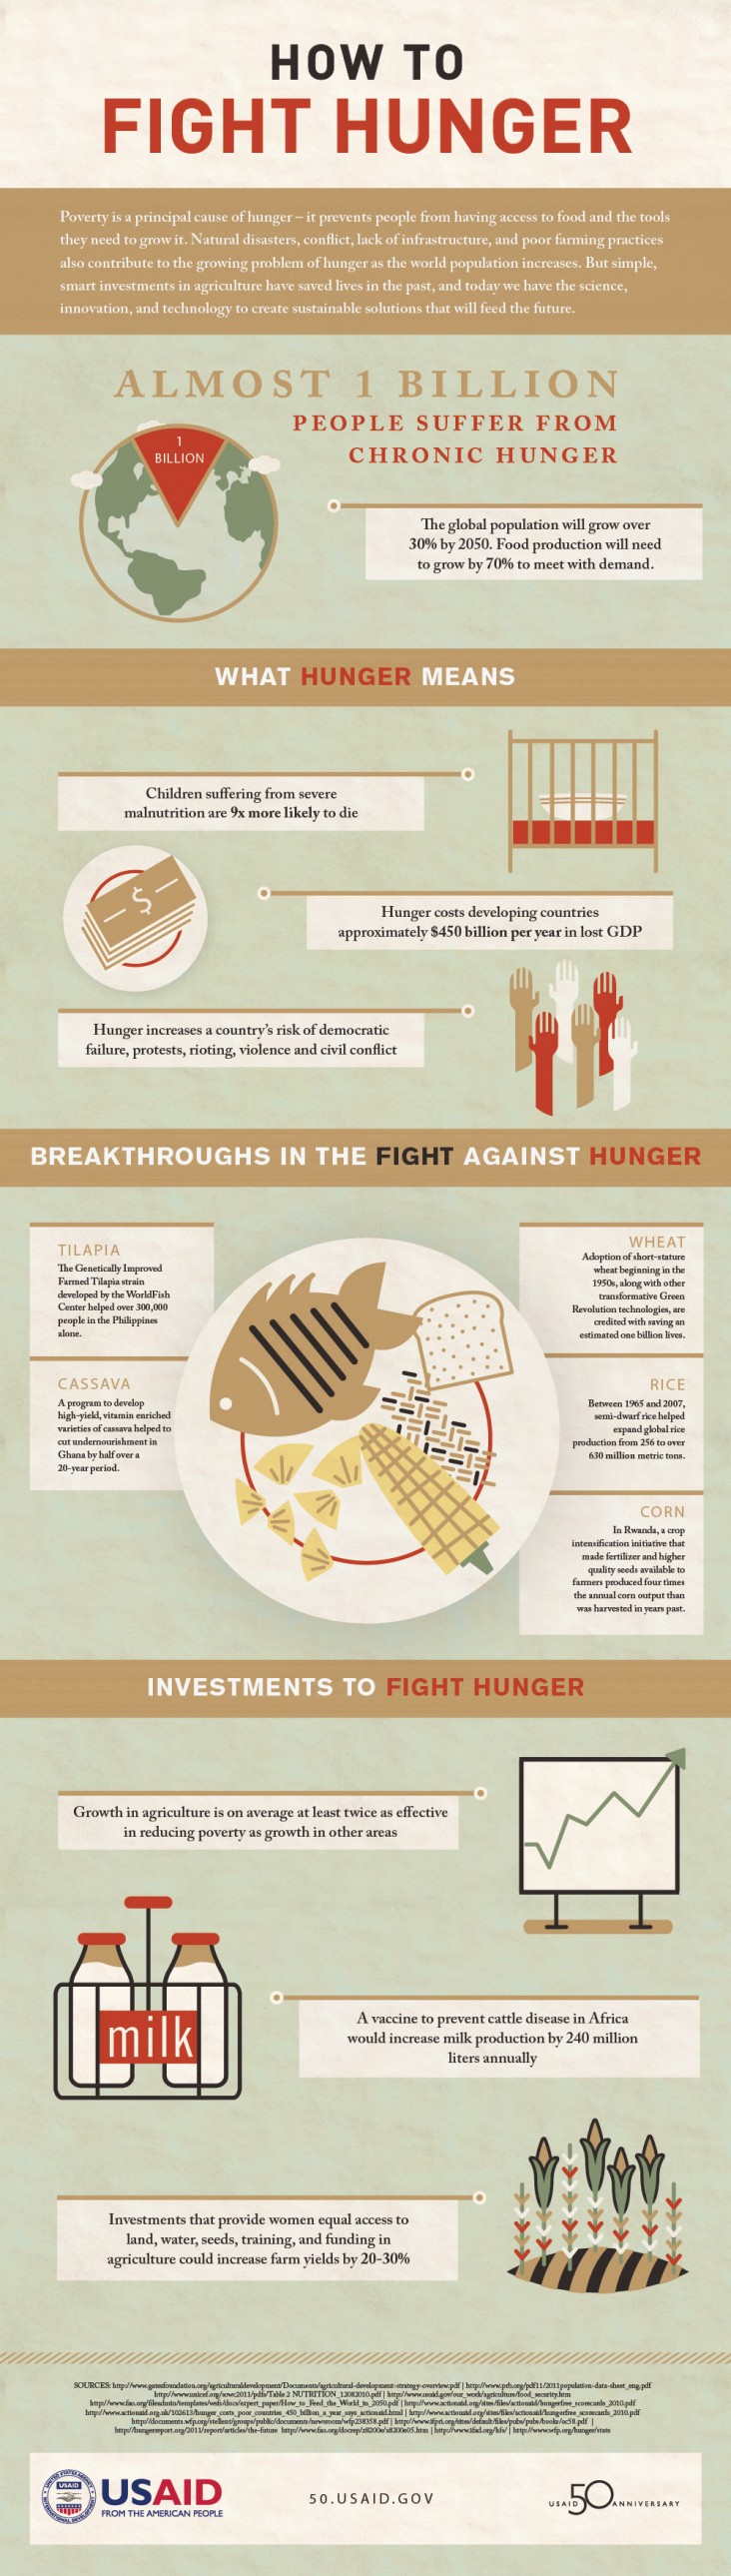 Infographic: How To Fight Hunger